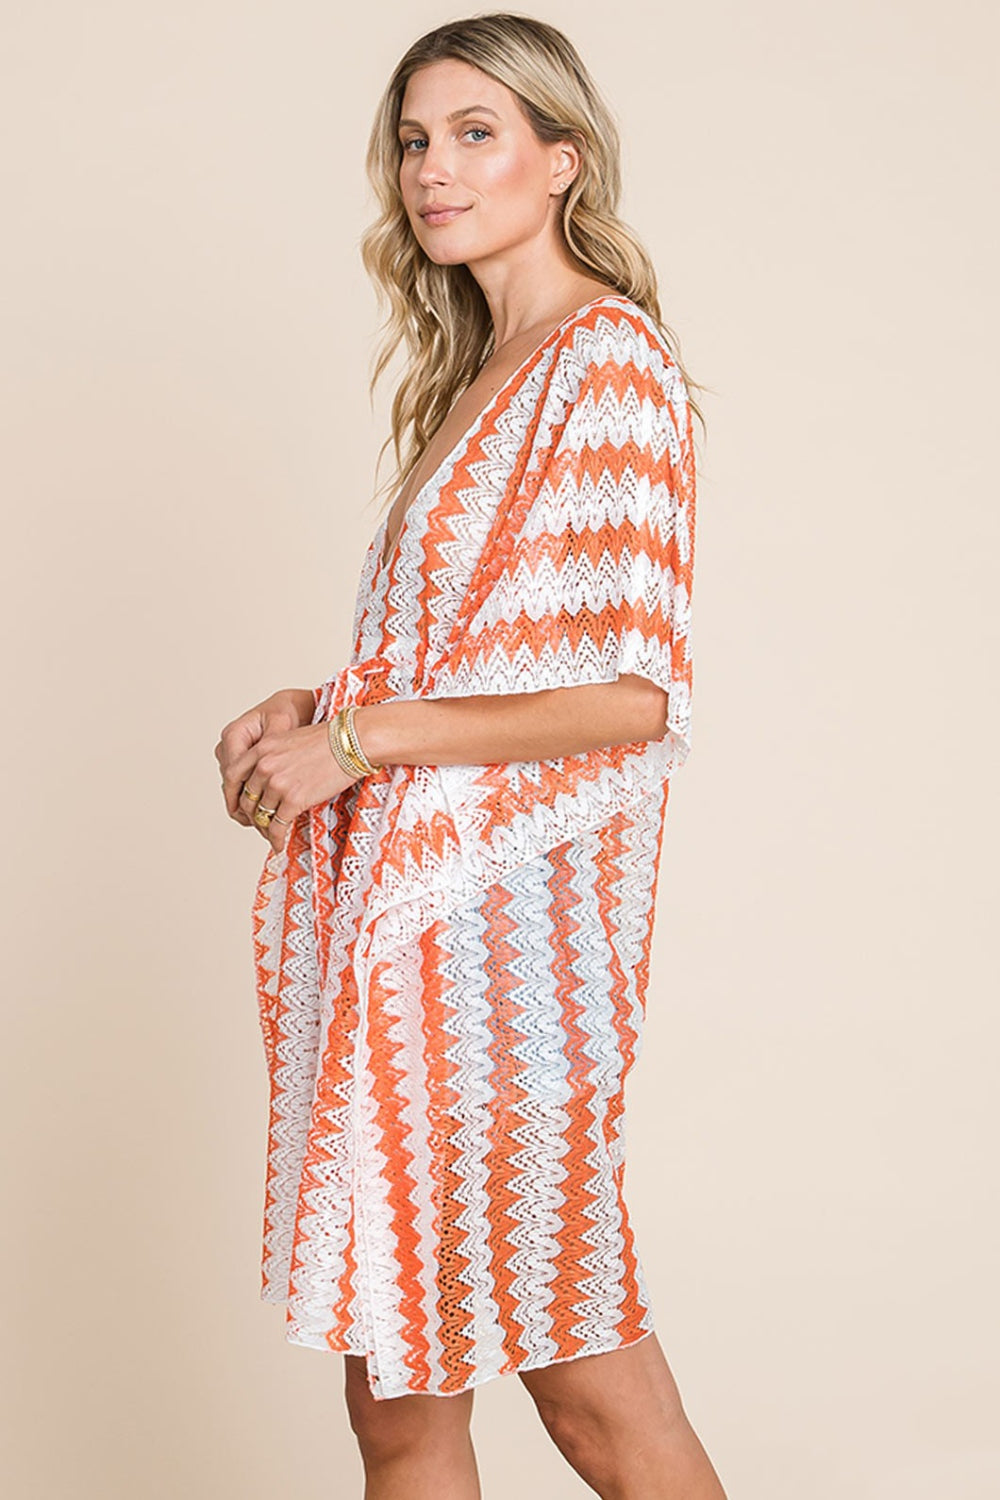 Crochet Lace Cover Up Dress/Top in Orange